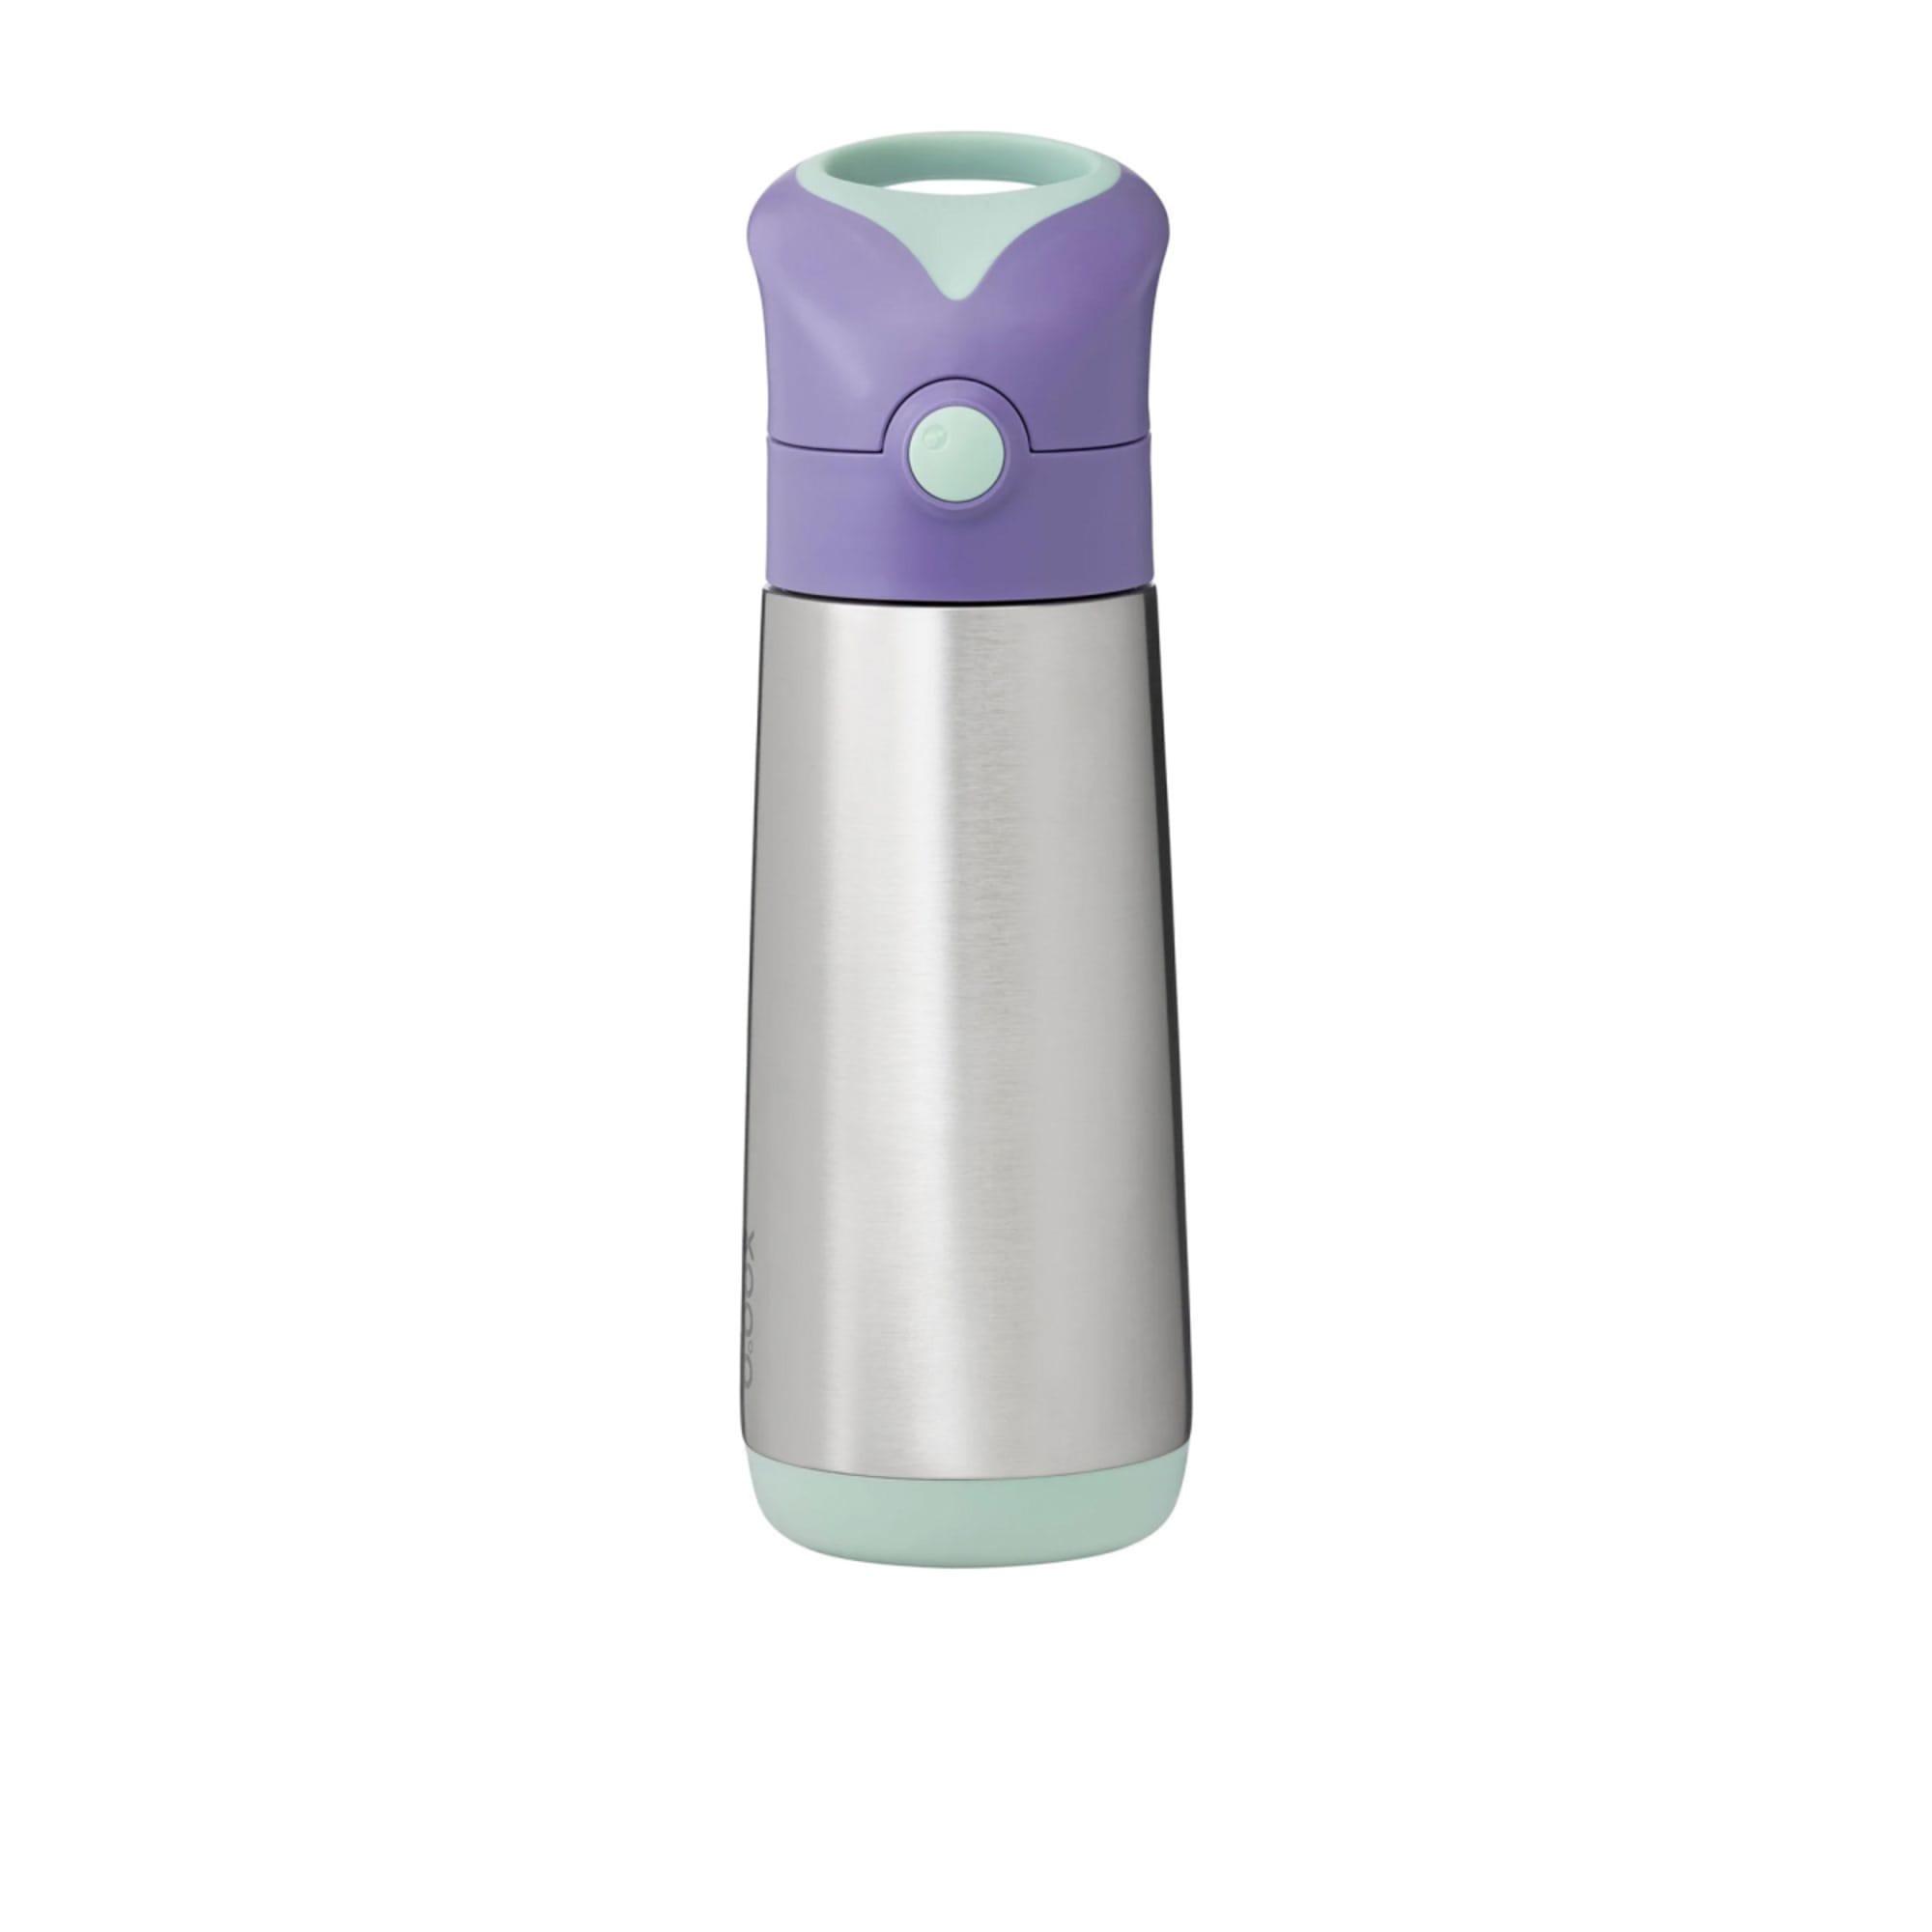 b.box Insulated Drink Bottle 500ml Lilac Pop Image 3